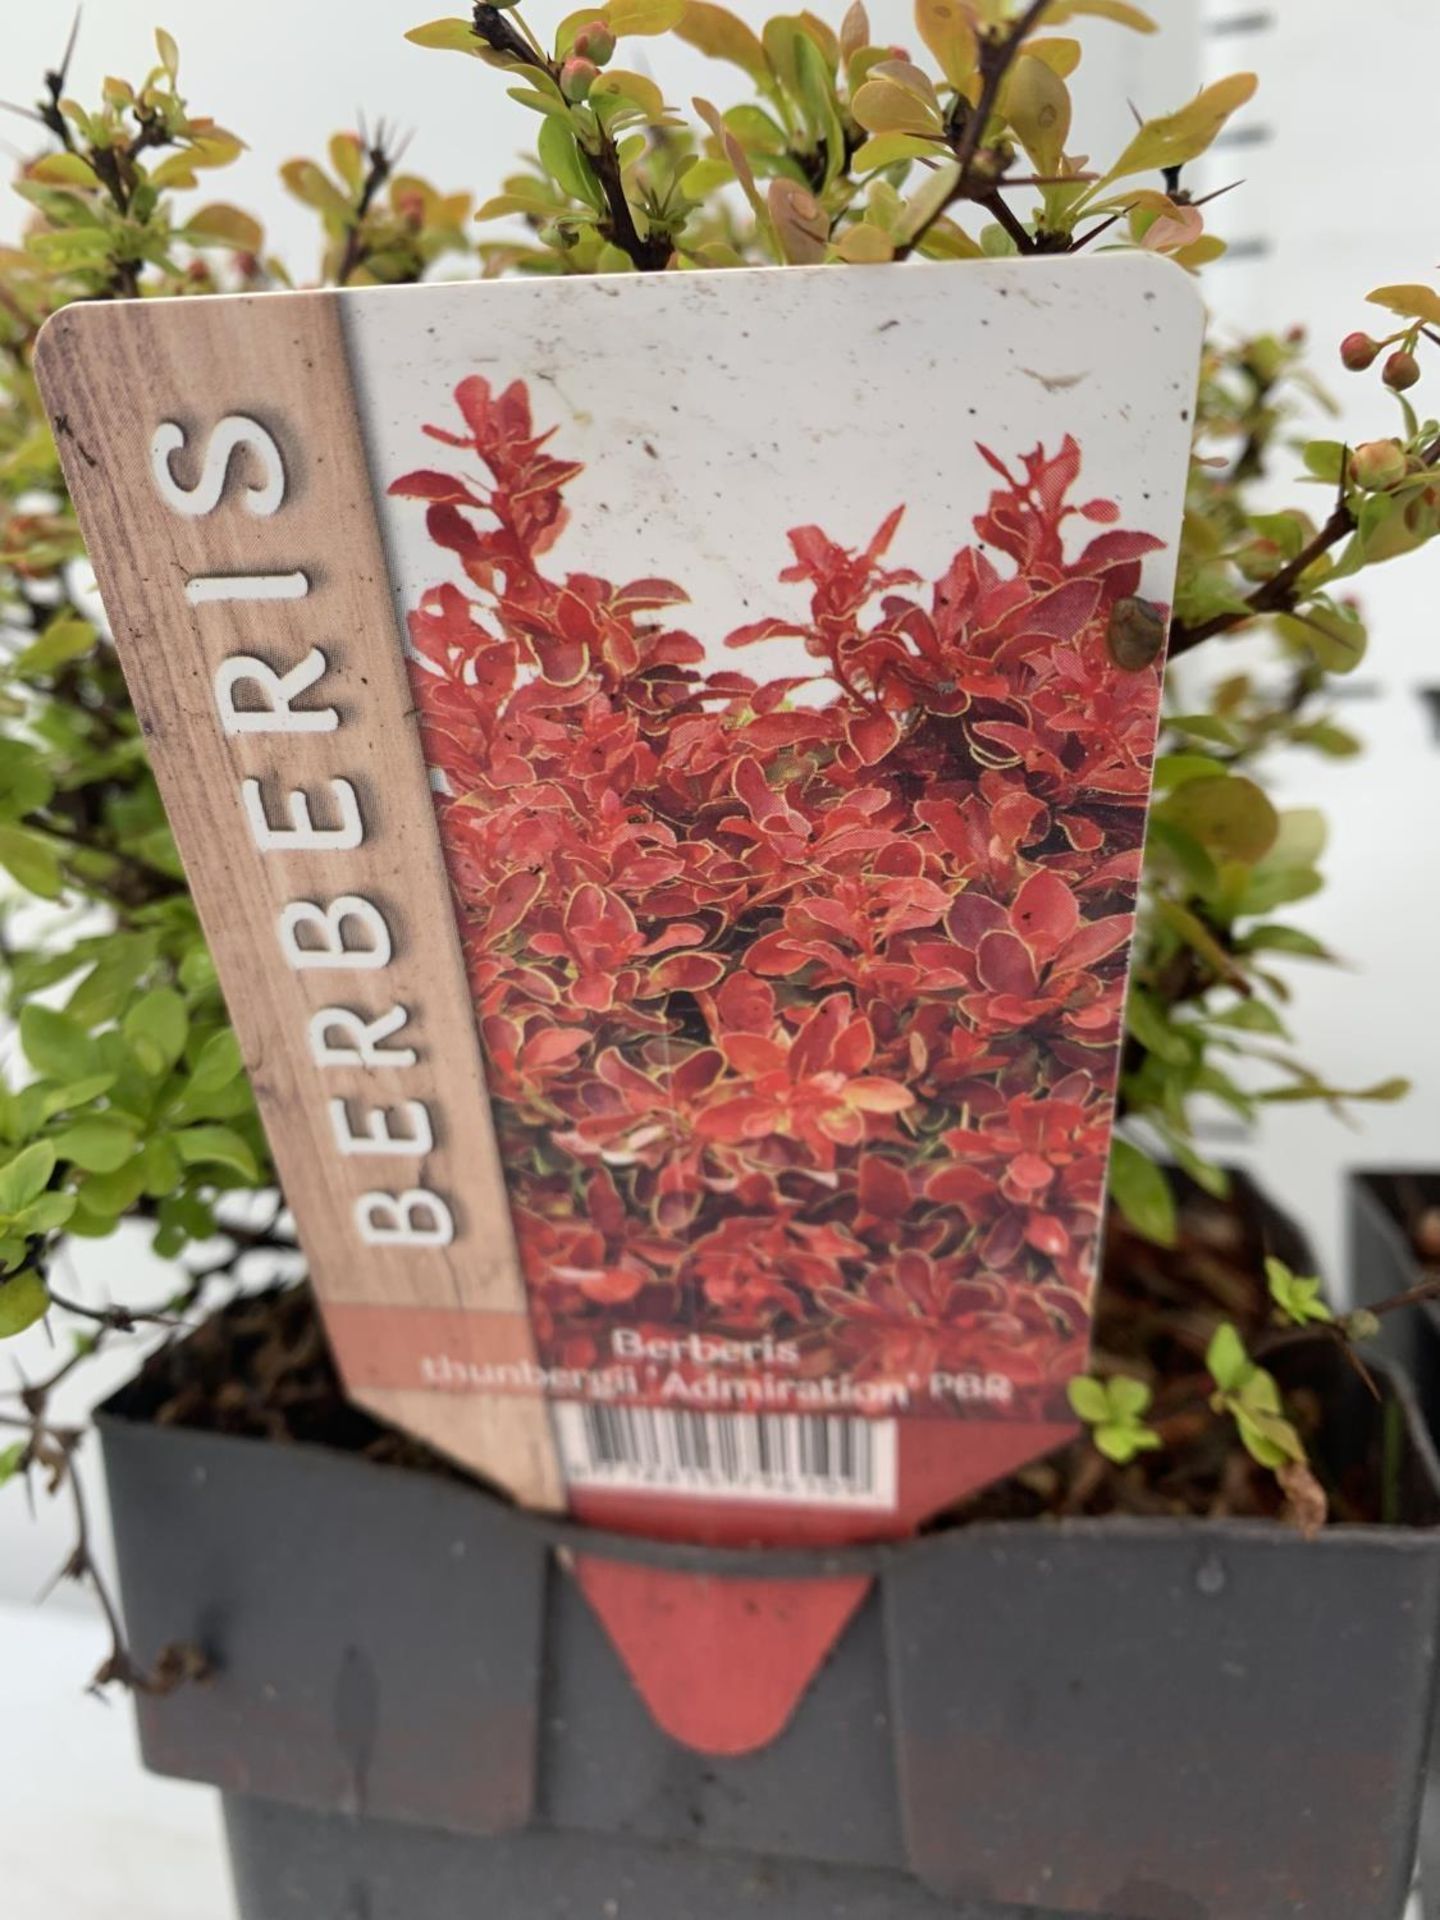 THREE ASSORTED BERBERIS THUNBERGII 'RUBY STAR' 'TINY GOLD' AND 'ADMIRATION' IN 2 LTR POTS PLUS VAT - Image 12 of 12